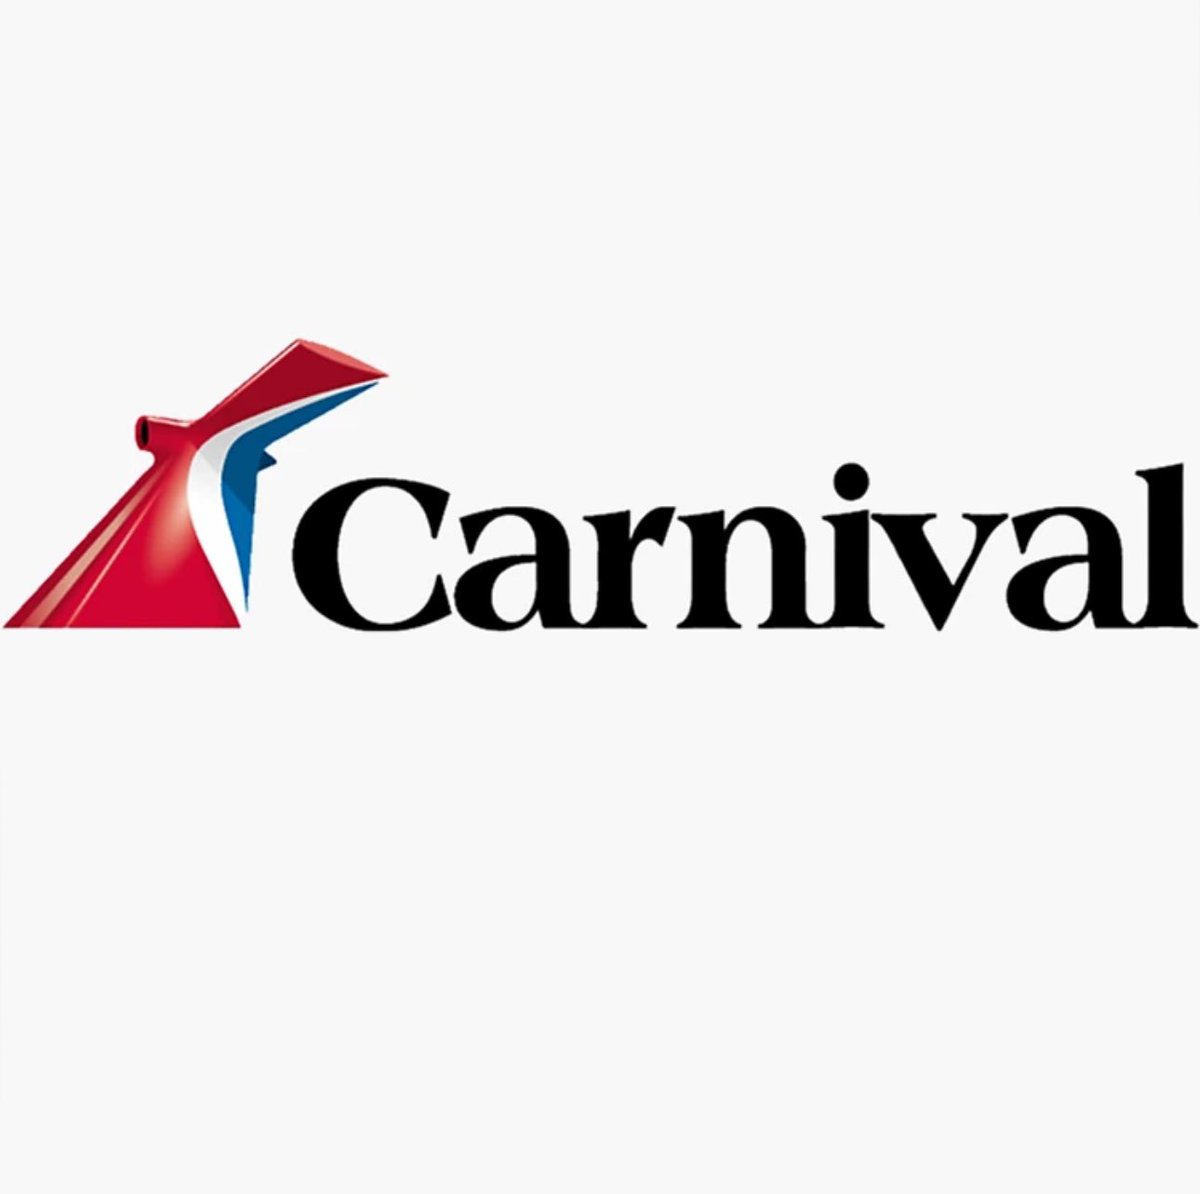 JUST IN: World's largest cruise company 'Carnival' announces 100% of its ships are now equipped with Elon Musk's Starlink internet.